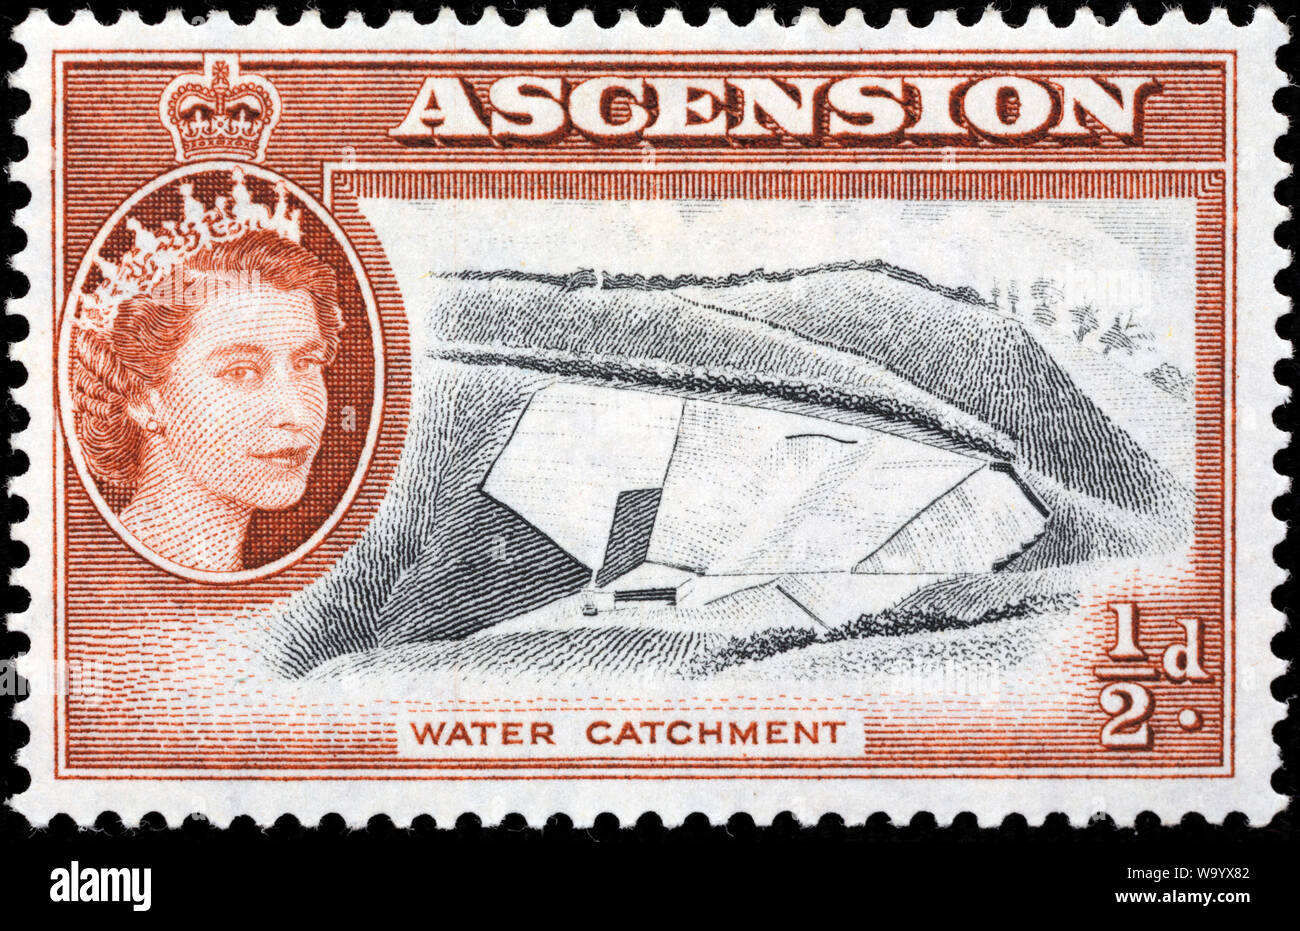 Water catchment, postage stamp, Ascension, 1956 Stock Photo